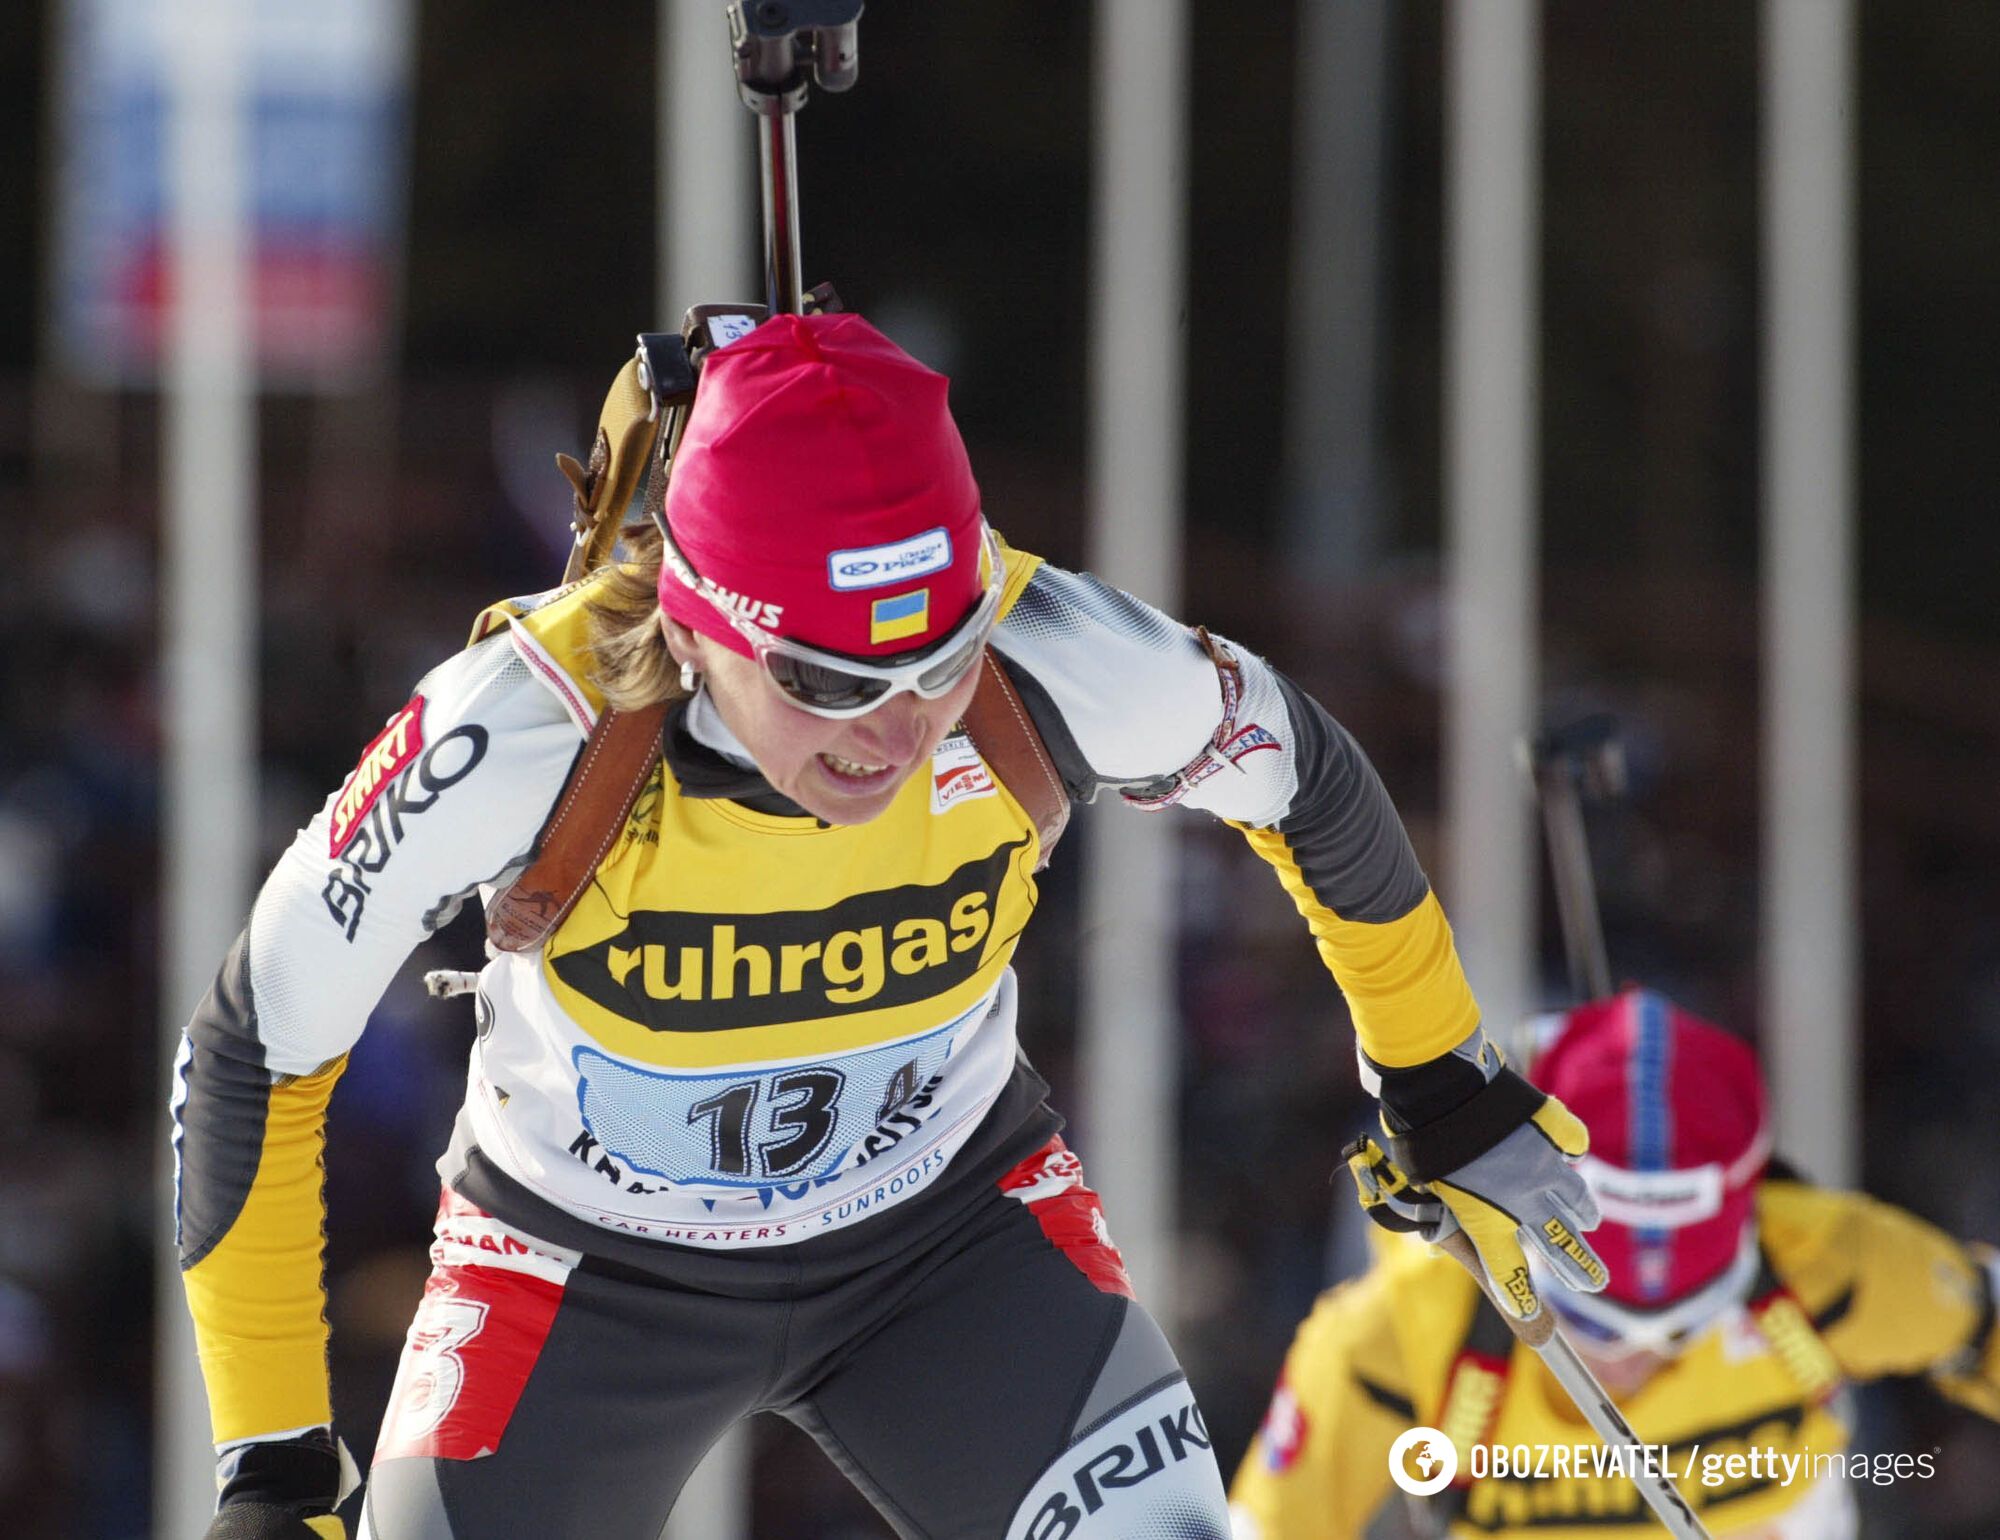 Ukraine's first medal at the Biathlon World Championships: Russian-born Petrova made it to the top three and helped the team